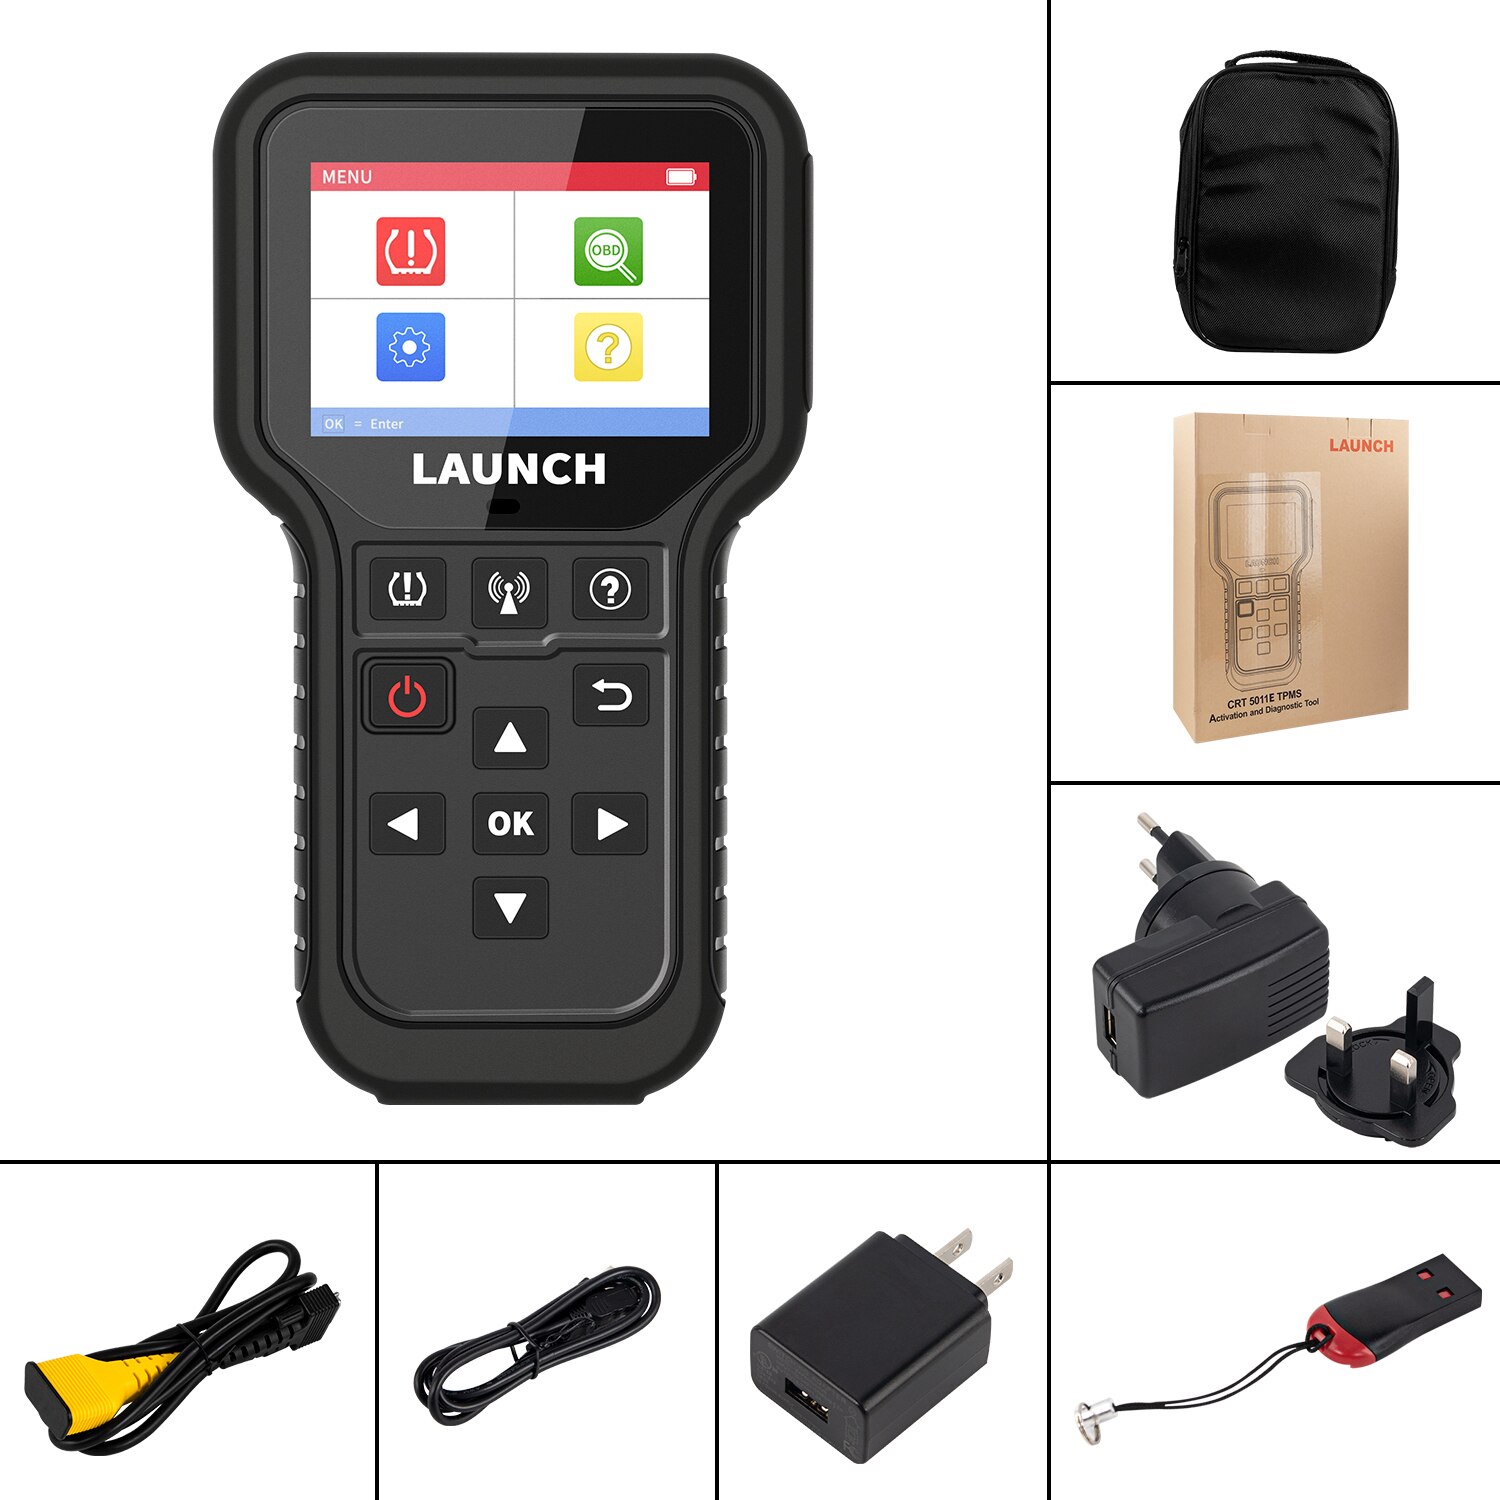 LAUNCH-X431-CRT5011E-TPMS-Tire-Pressure-Diagnsotic-Tool-315MHz-433MHz-Sensor-Activation-Programing-Learning-Reading-OBD2-Scanner-1005003340267559